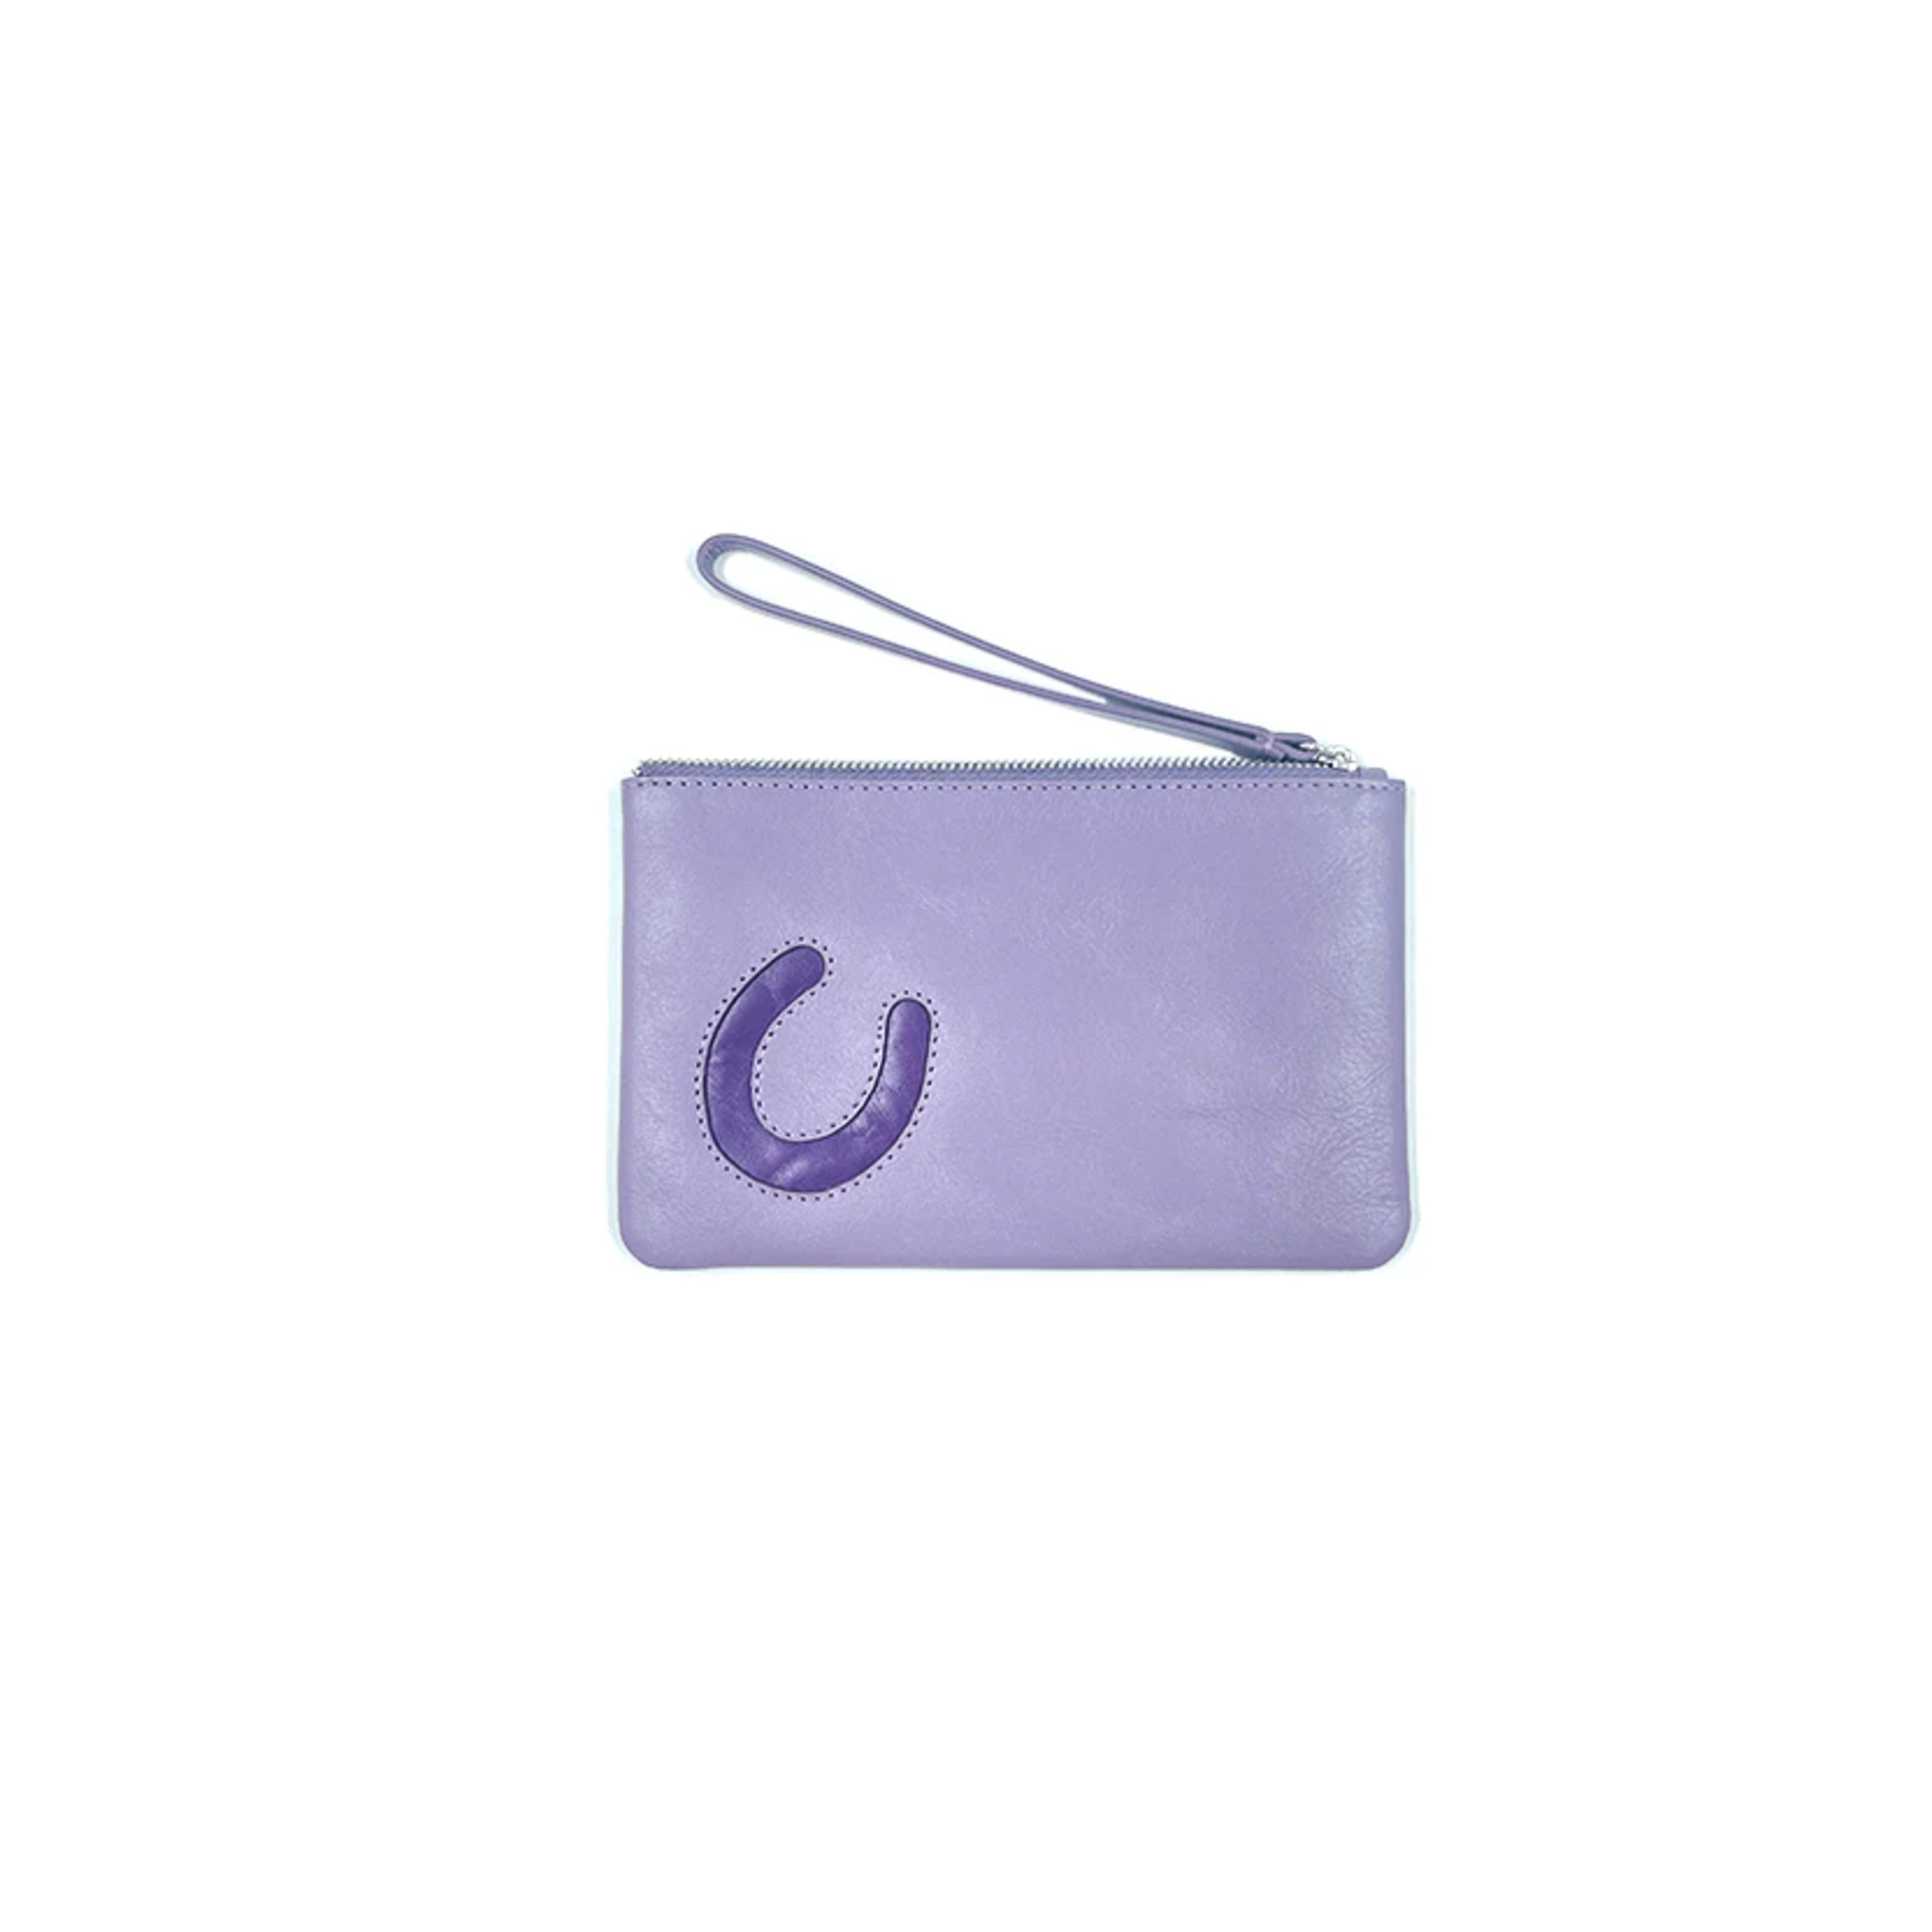 Get the Gallop Wristlet